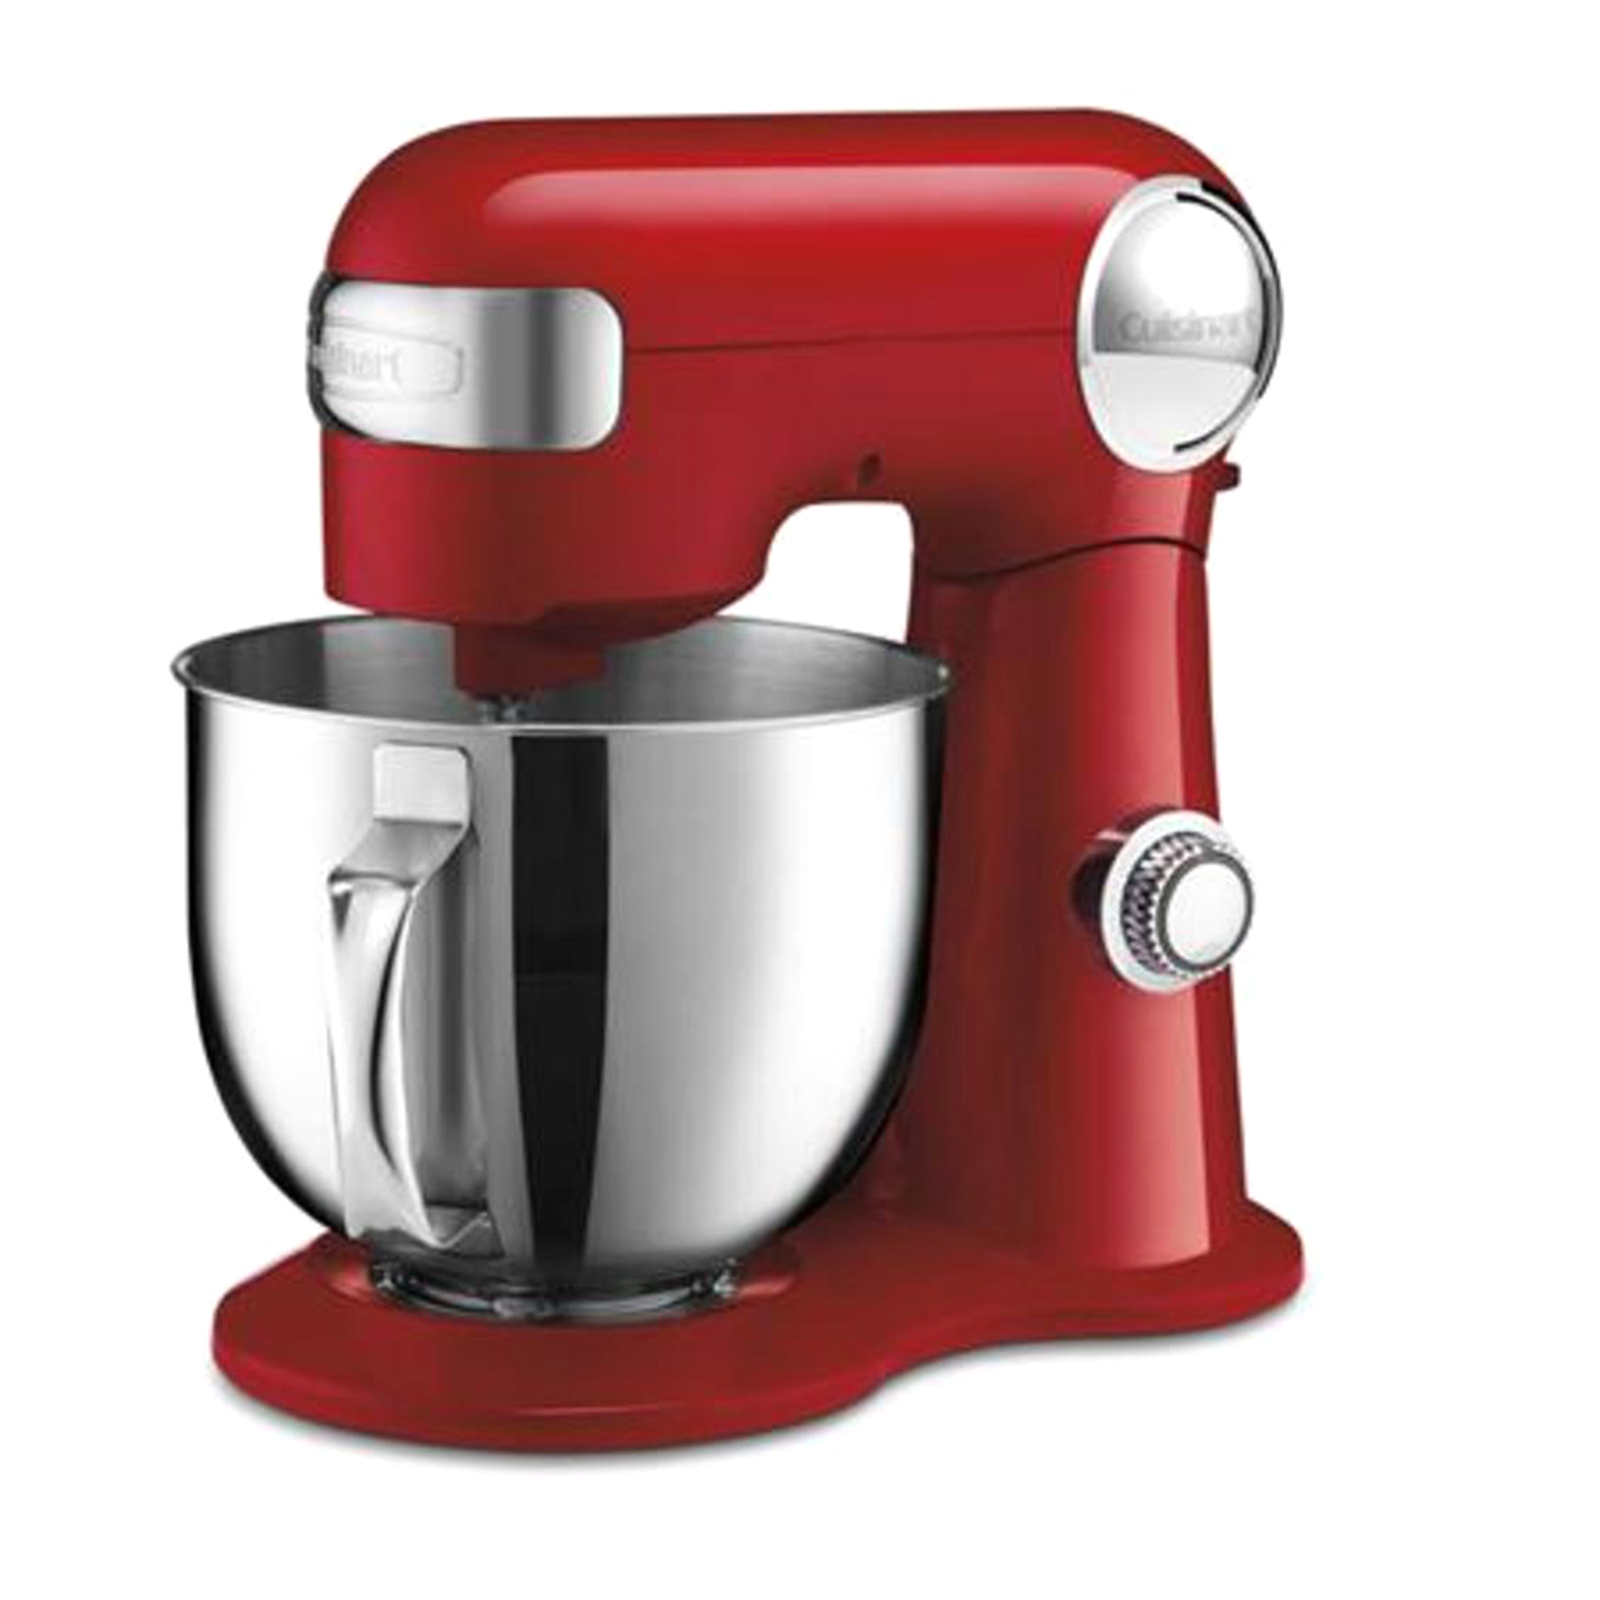 Cuisinart SM-50R  5.5qt. Stand Mixer with Accessories - Red